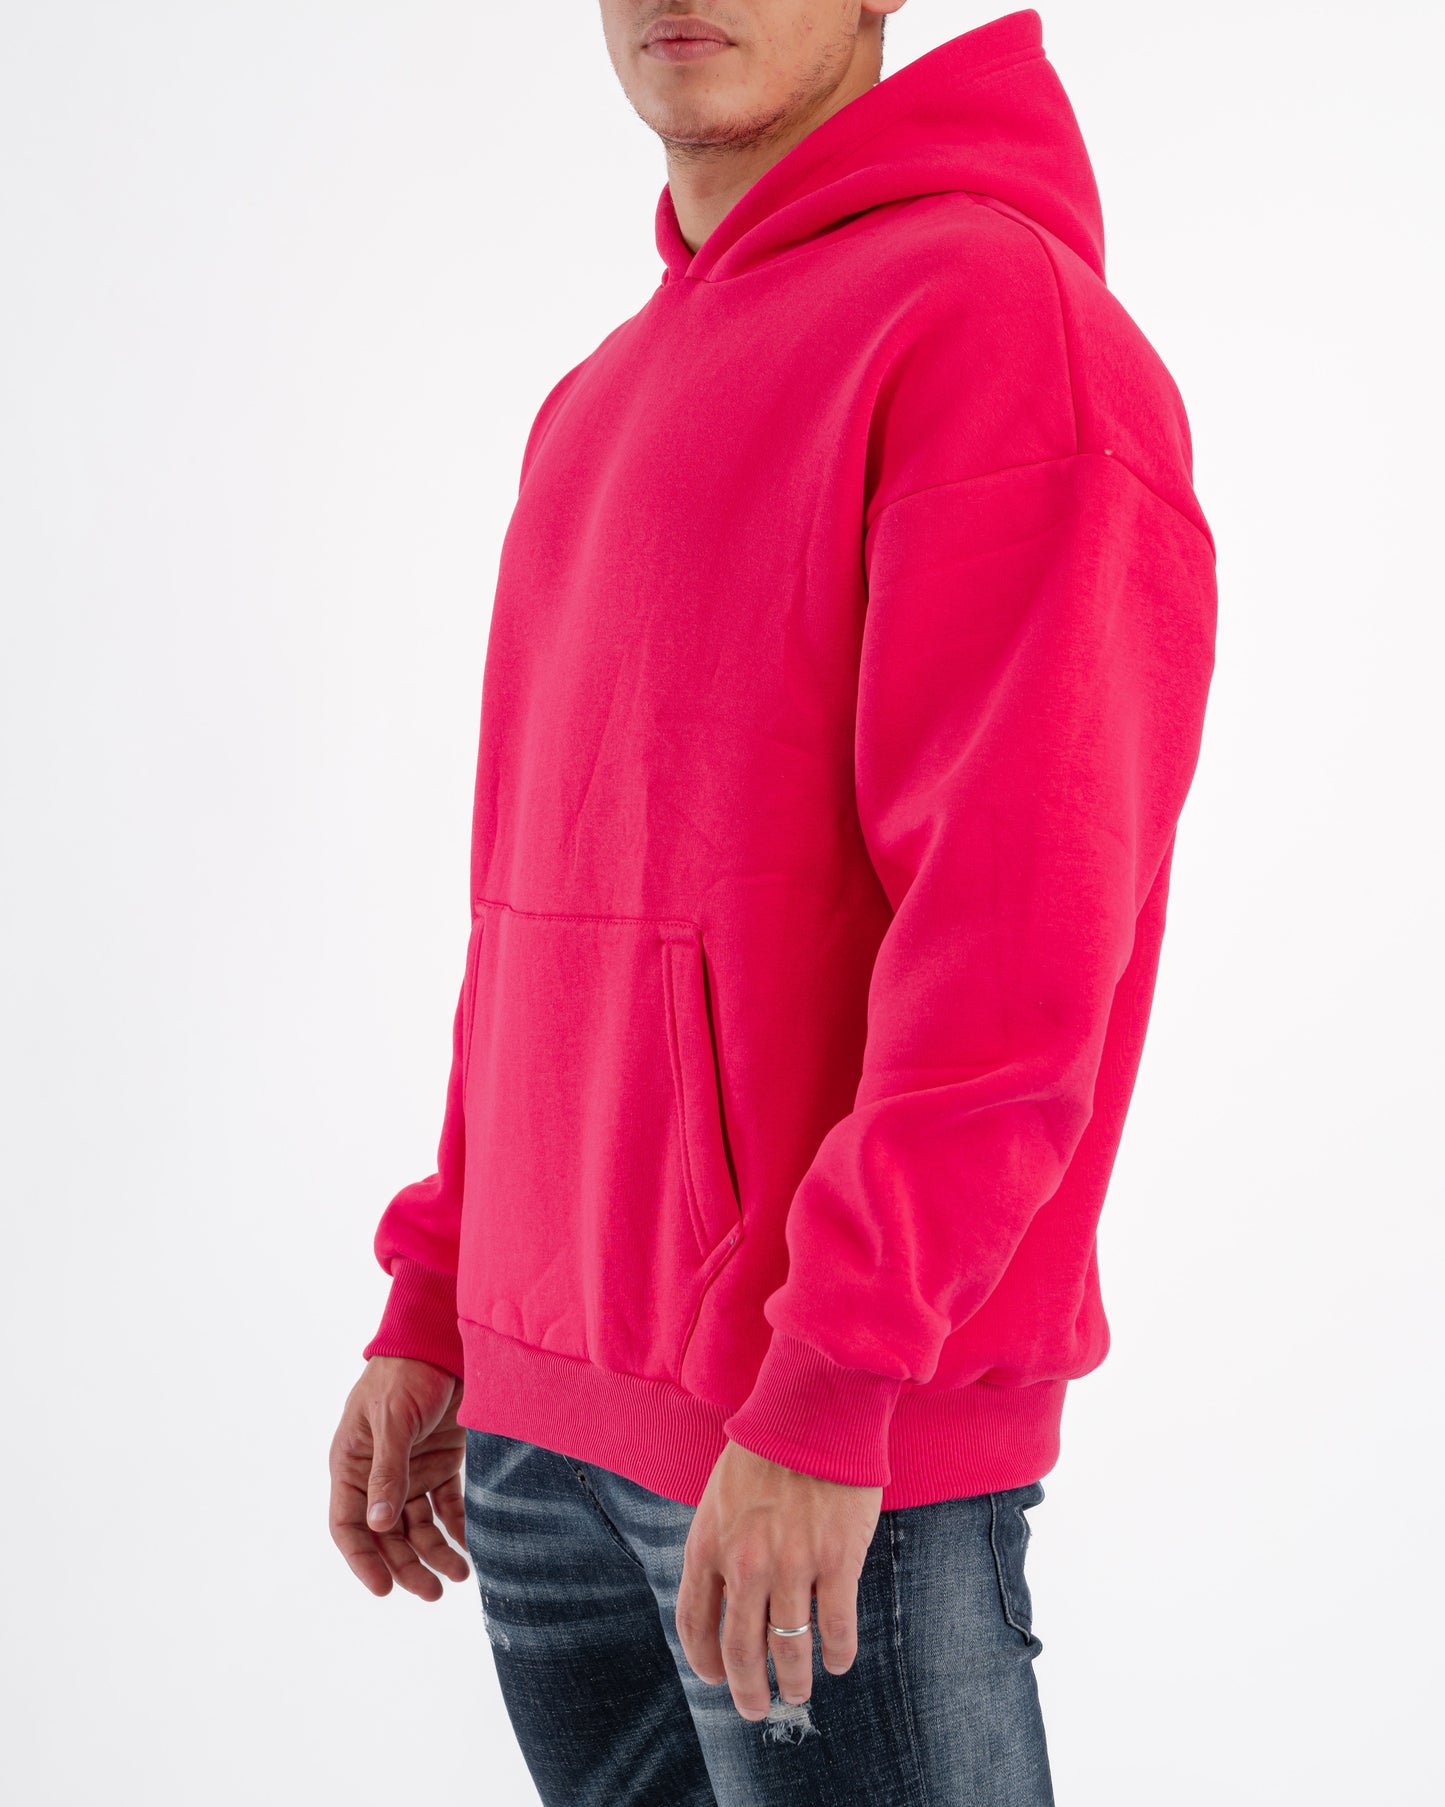 HOT PINK OVER-SIZED HOODIE